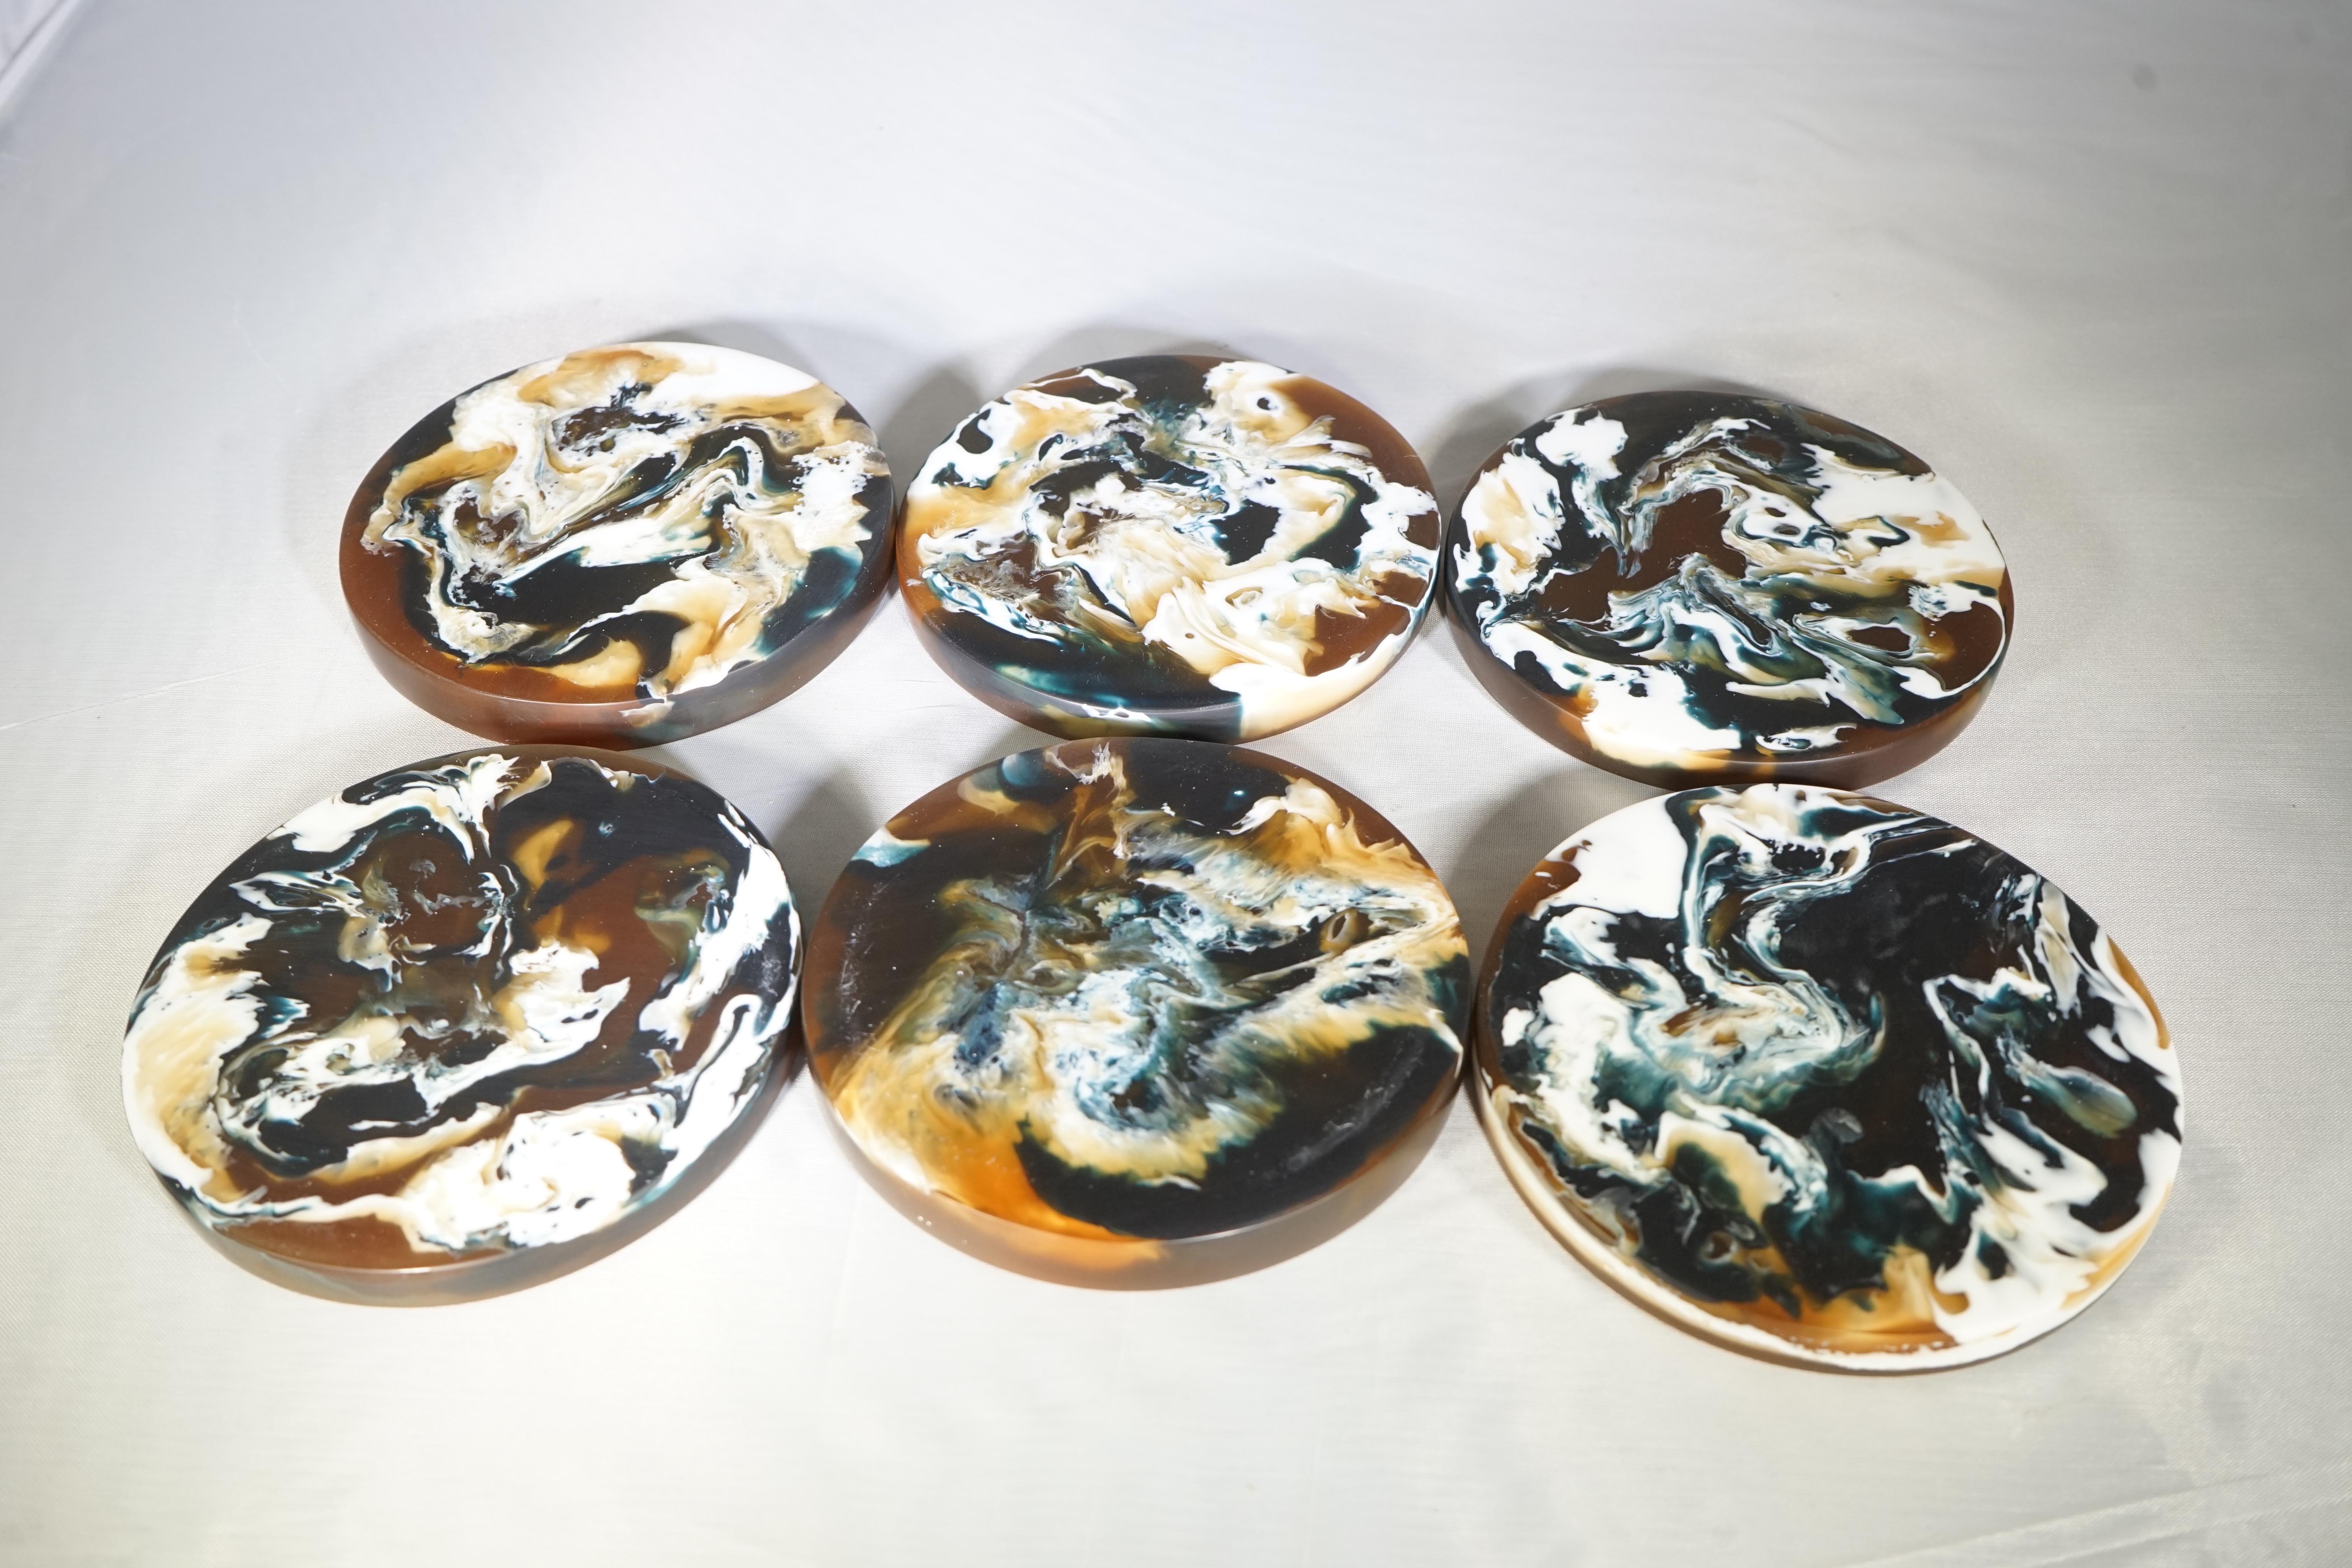 Contemporary coasters in a set of six, with dark brown and white, swirled resin by CDMX Design. Brand new.